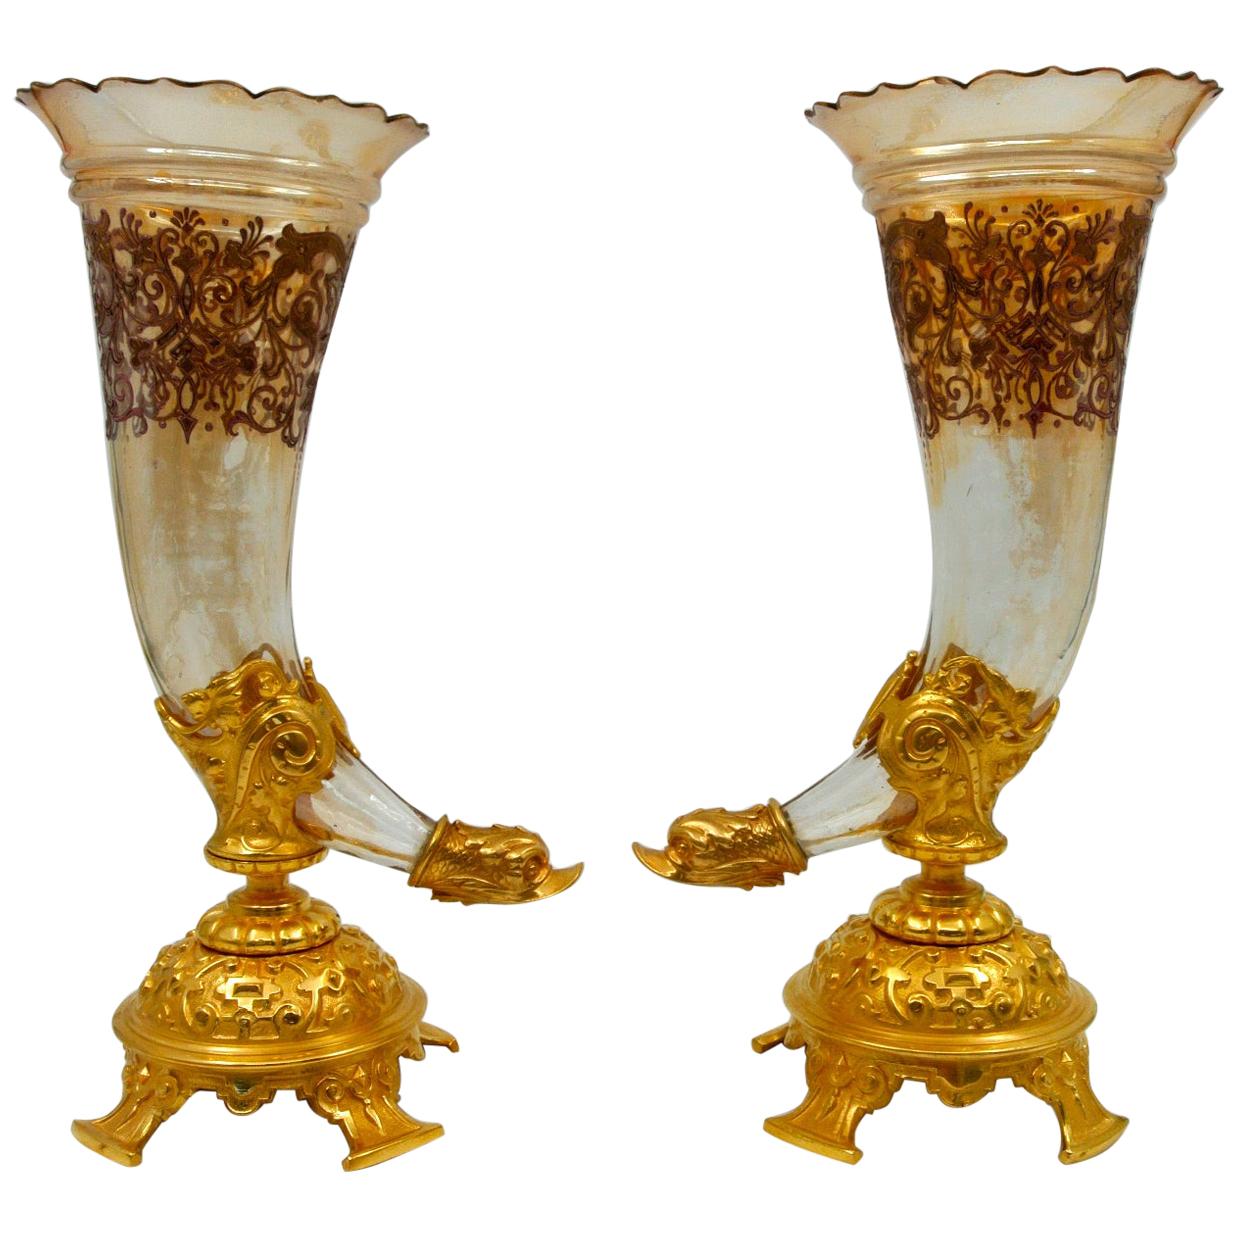 Pair of Bouquetières, Enameled Gilt Bronze and Crystal Vases